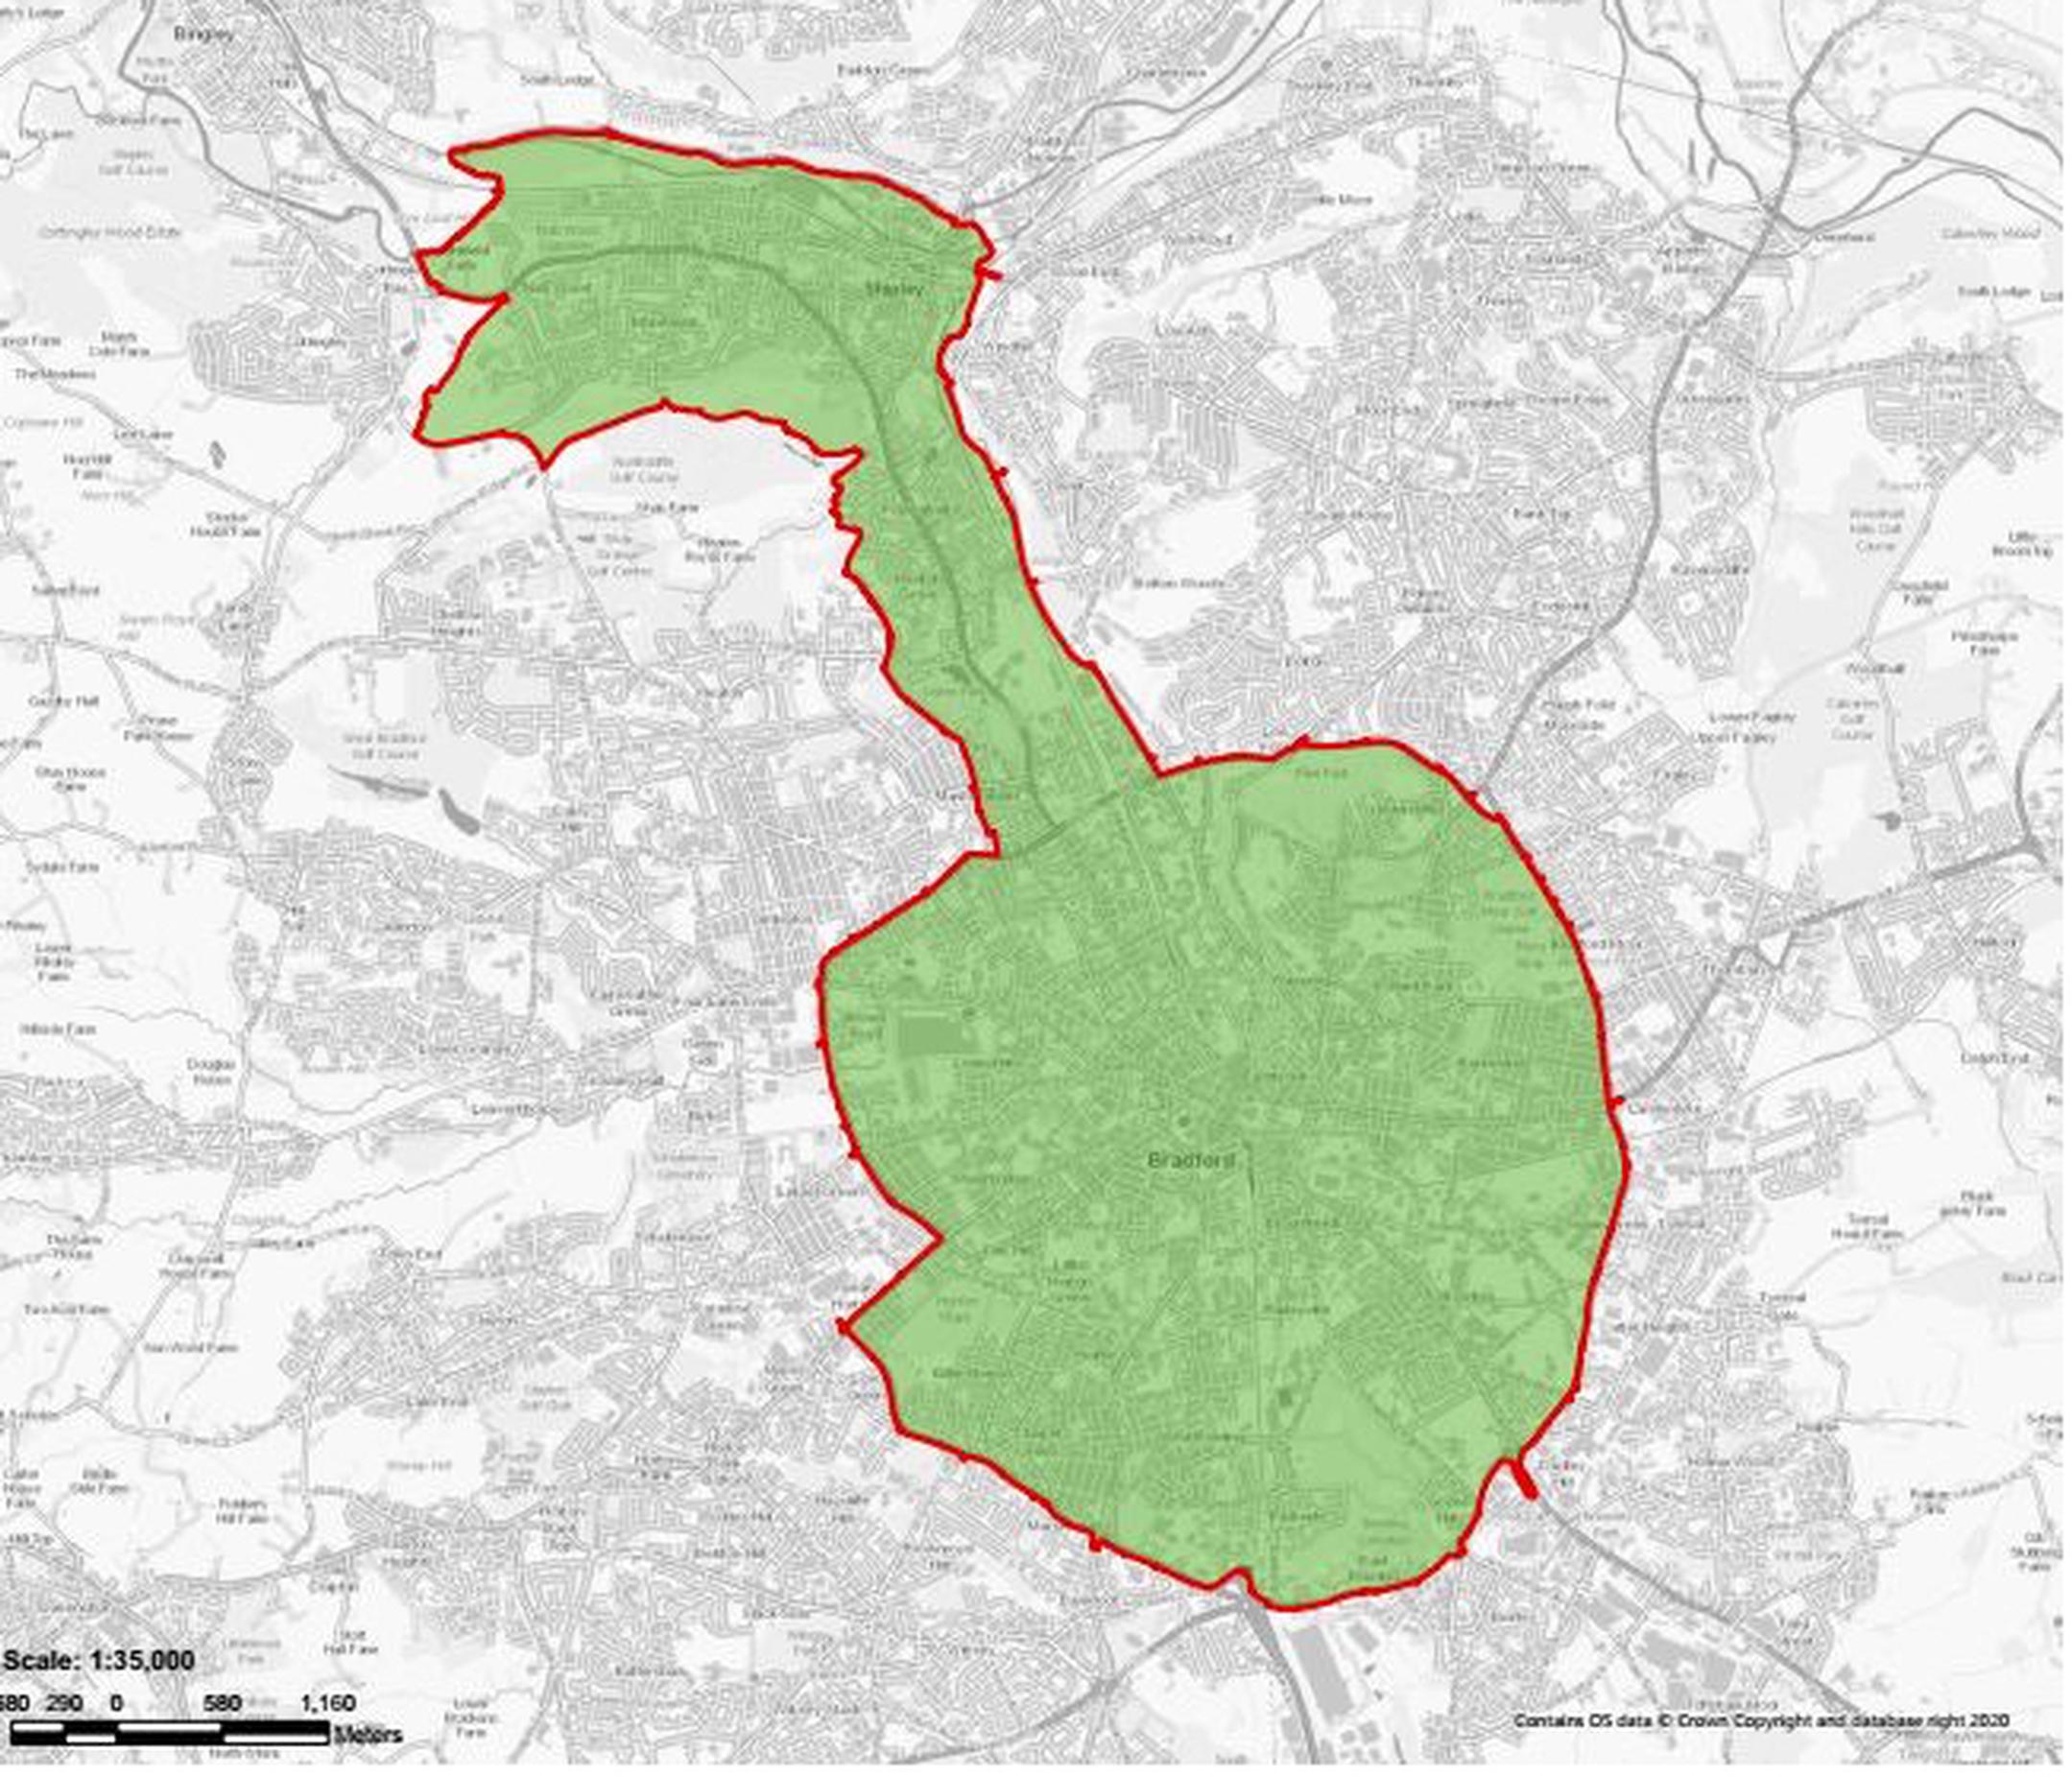 The Bradford Clean Air Zone covers the city centre area as far as the outer ring road and extends along the Aire Valley Corridor